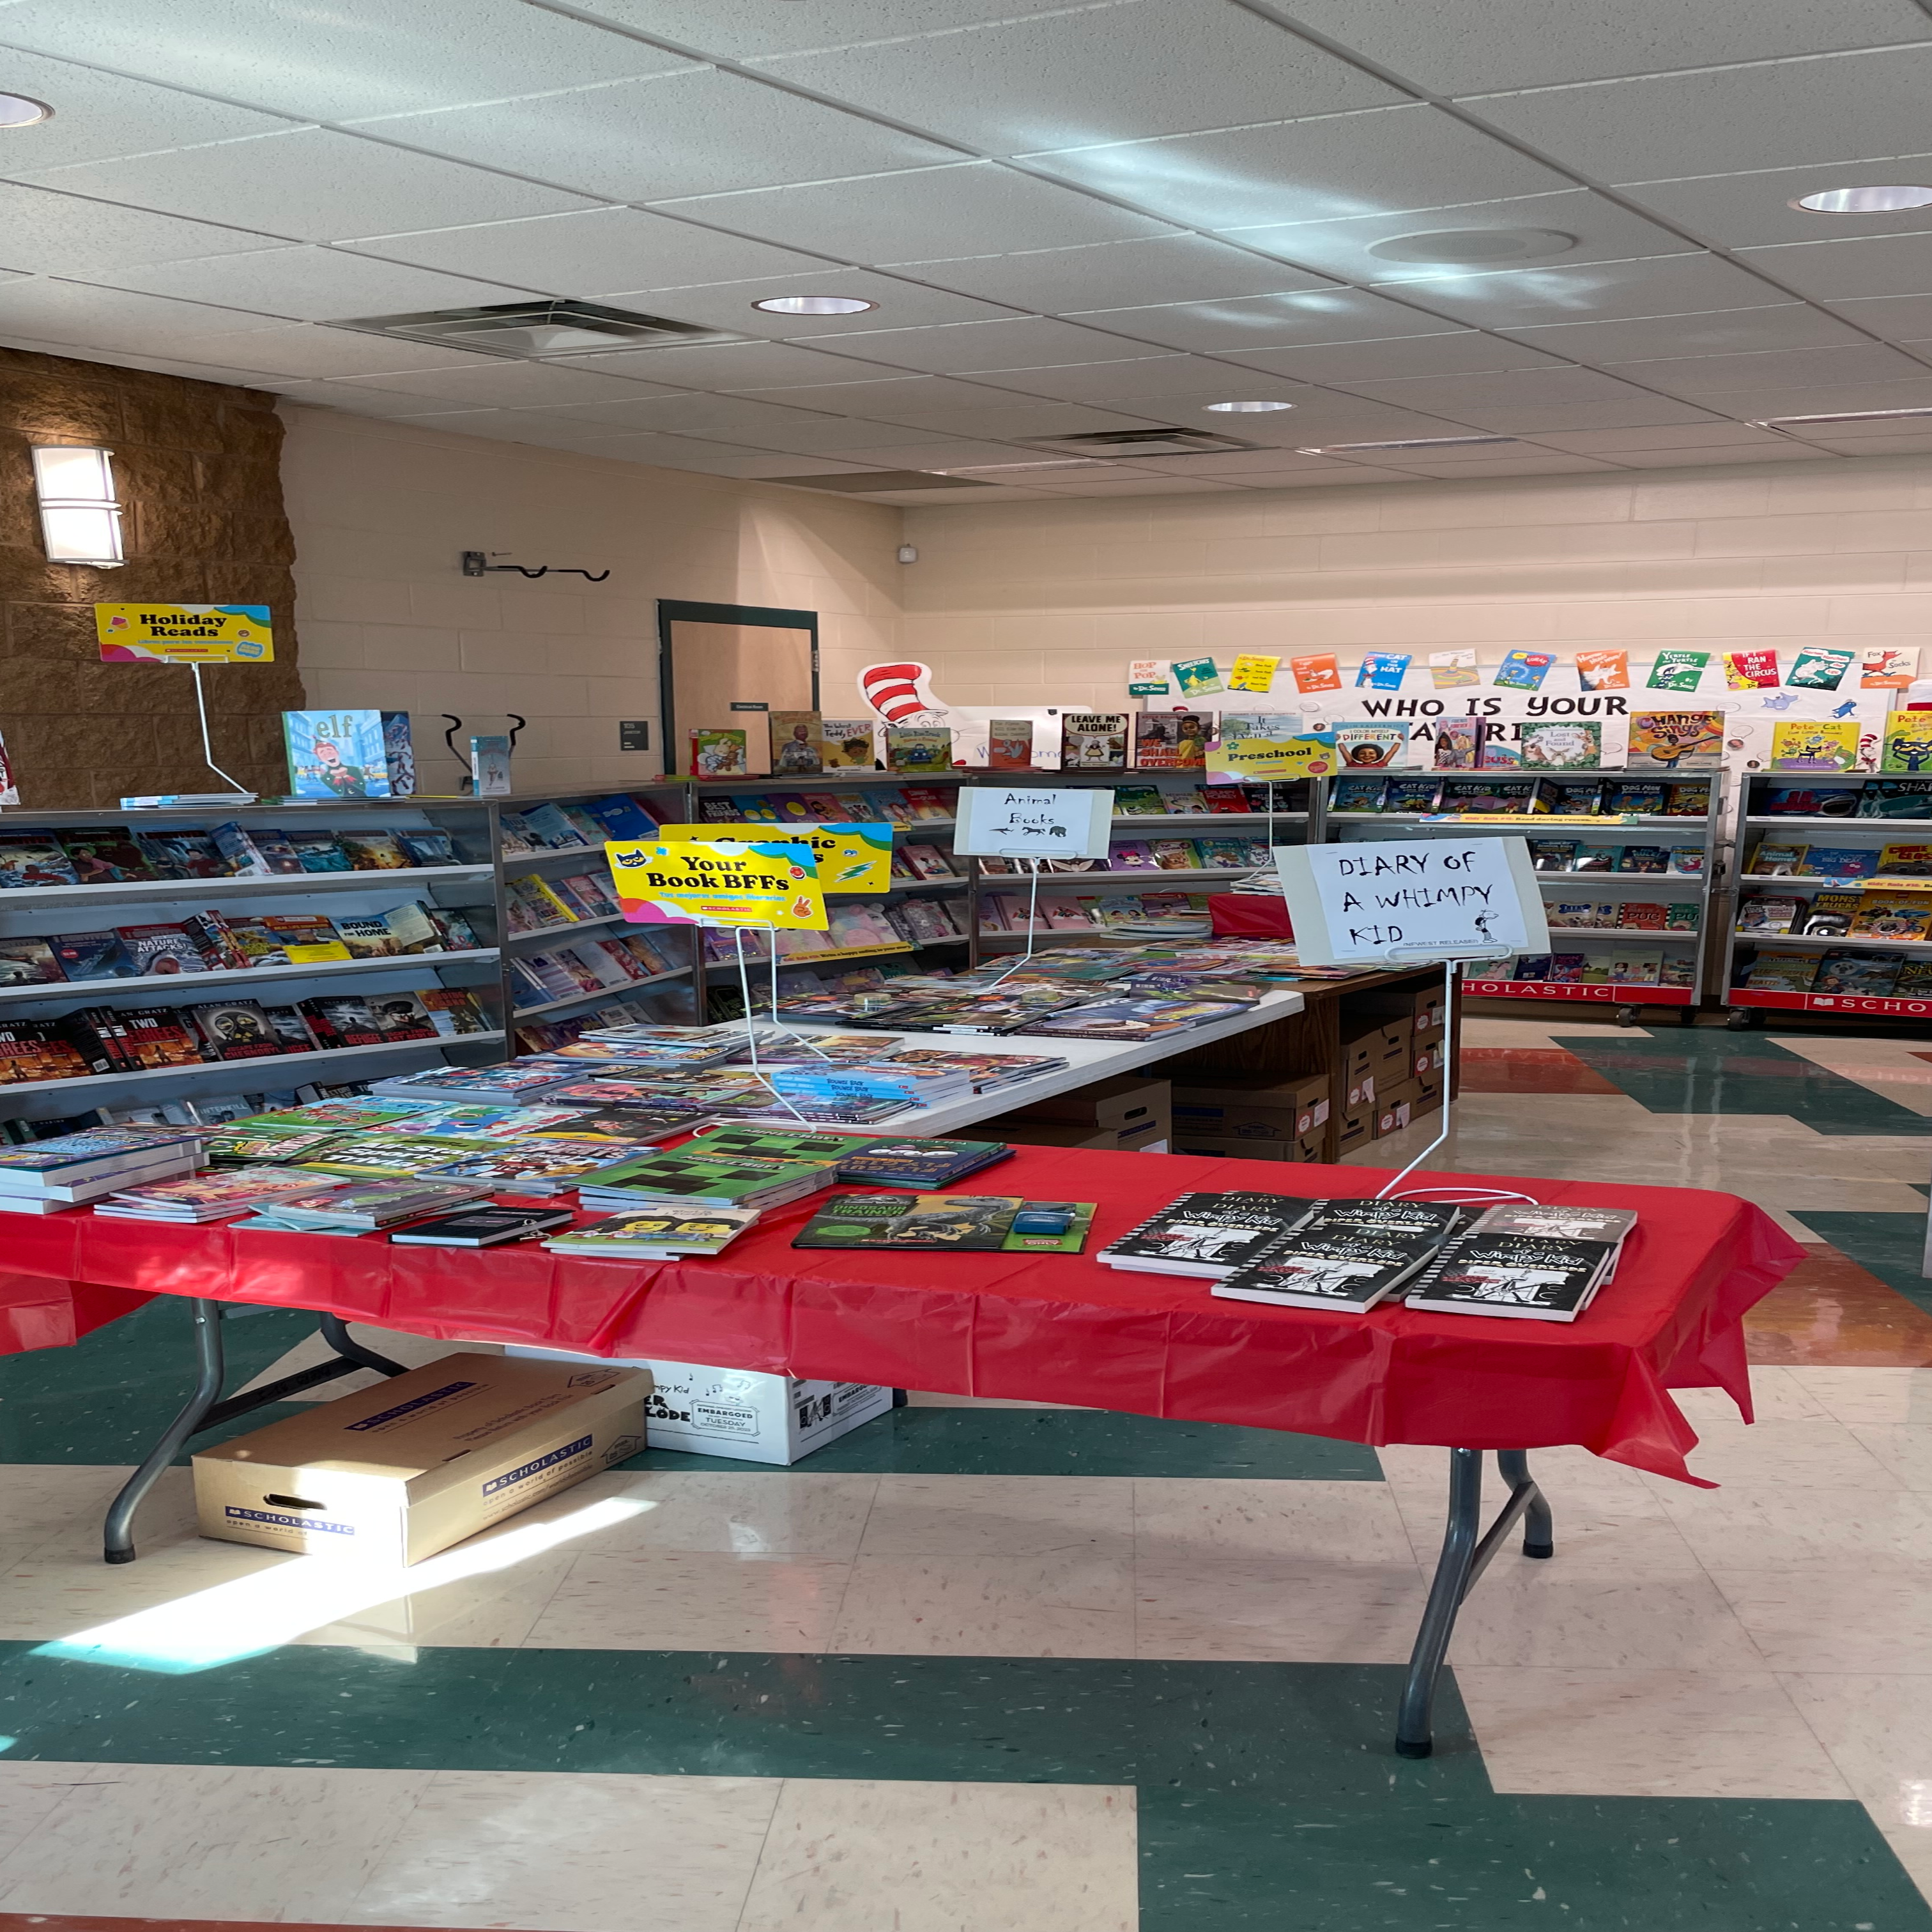 Image of book fair setup on tables and carts